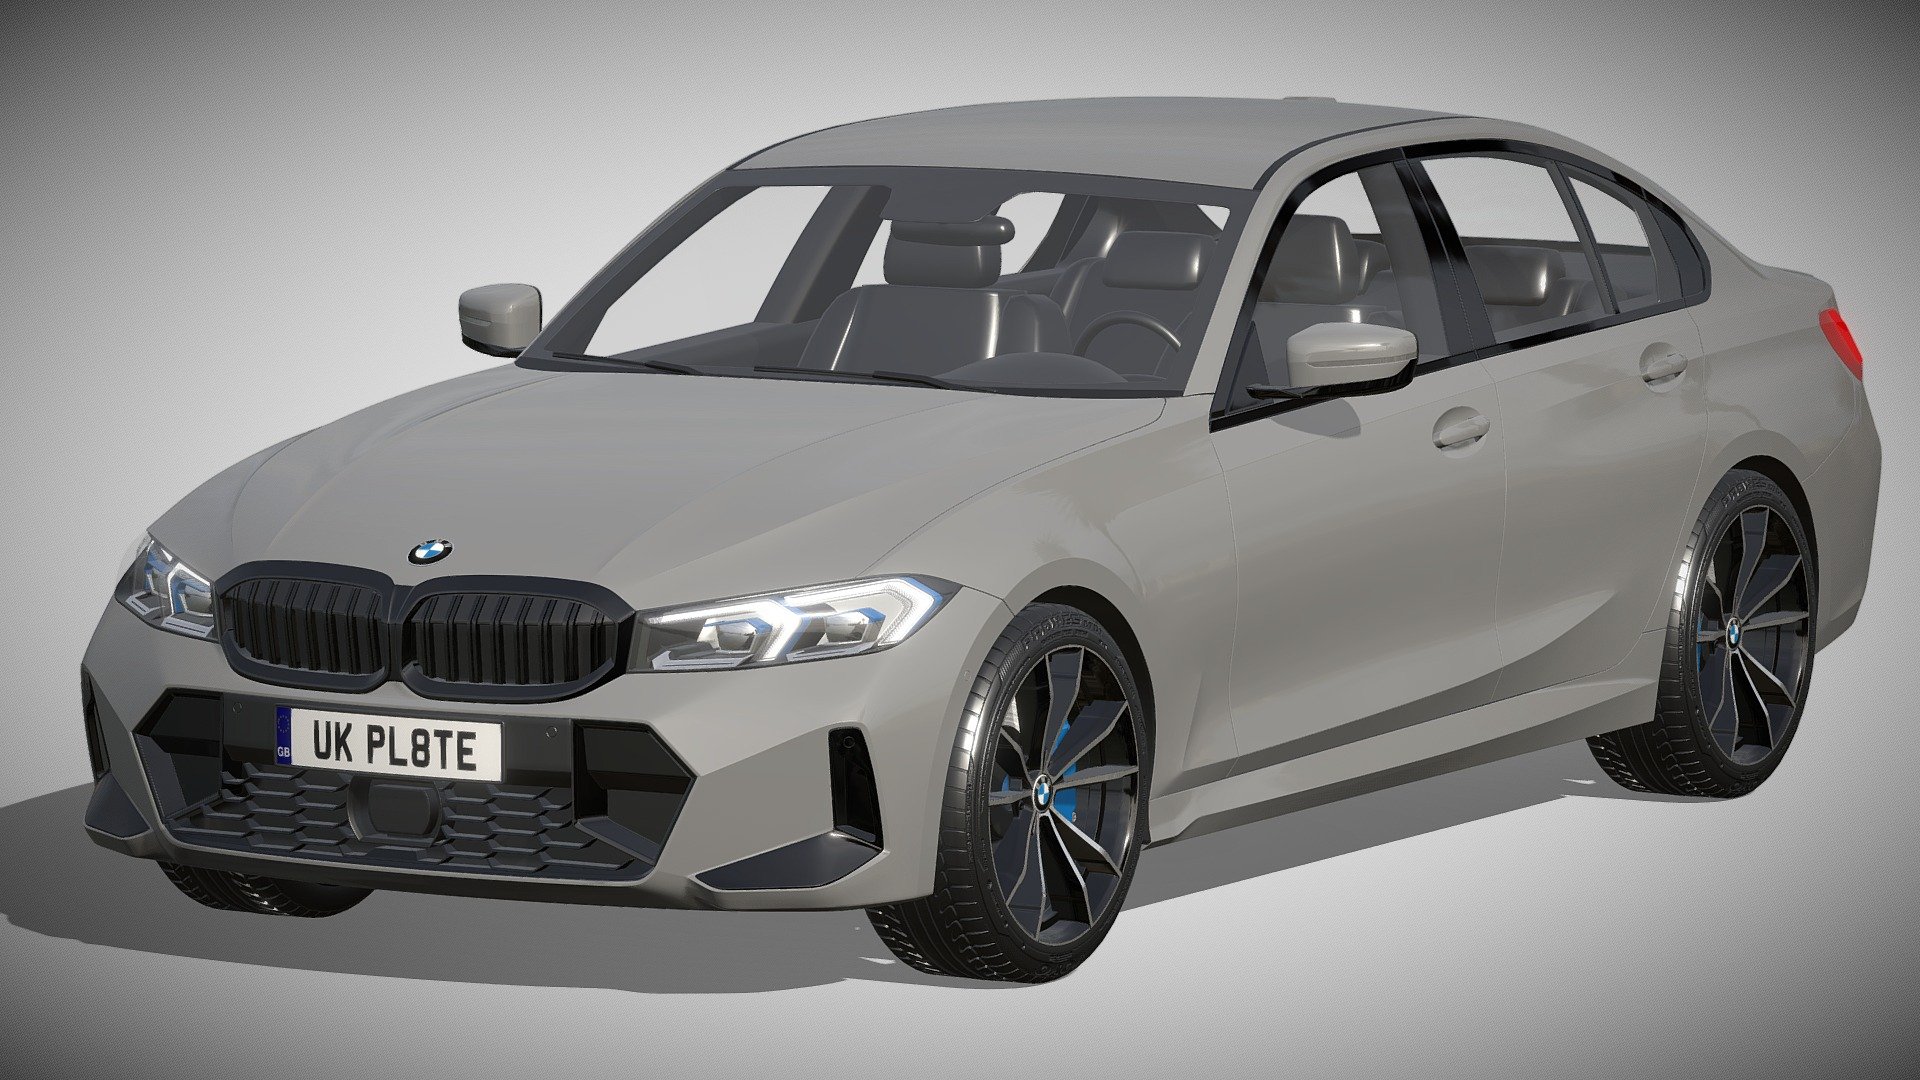 BMW 3er Limousine 2022

https://www.bmw.de/de/neufahrzeuge/3er/limousine/2022/bmw-3-er-limousine-ueberblick.html

Clean geometry Light weight model, yet completely detailed for HI-Res renders. Use for movies, Advertisements or games

Corona render and materials

All textures include in *.rar files

Lighting setup is not included in the file! - BMW 3er Limousine 2022 - Buy Royalty Free 3D model by zifir3d 3d model